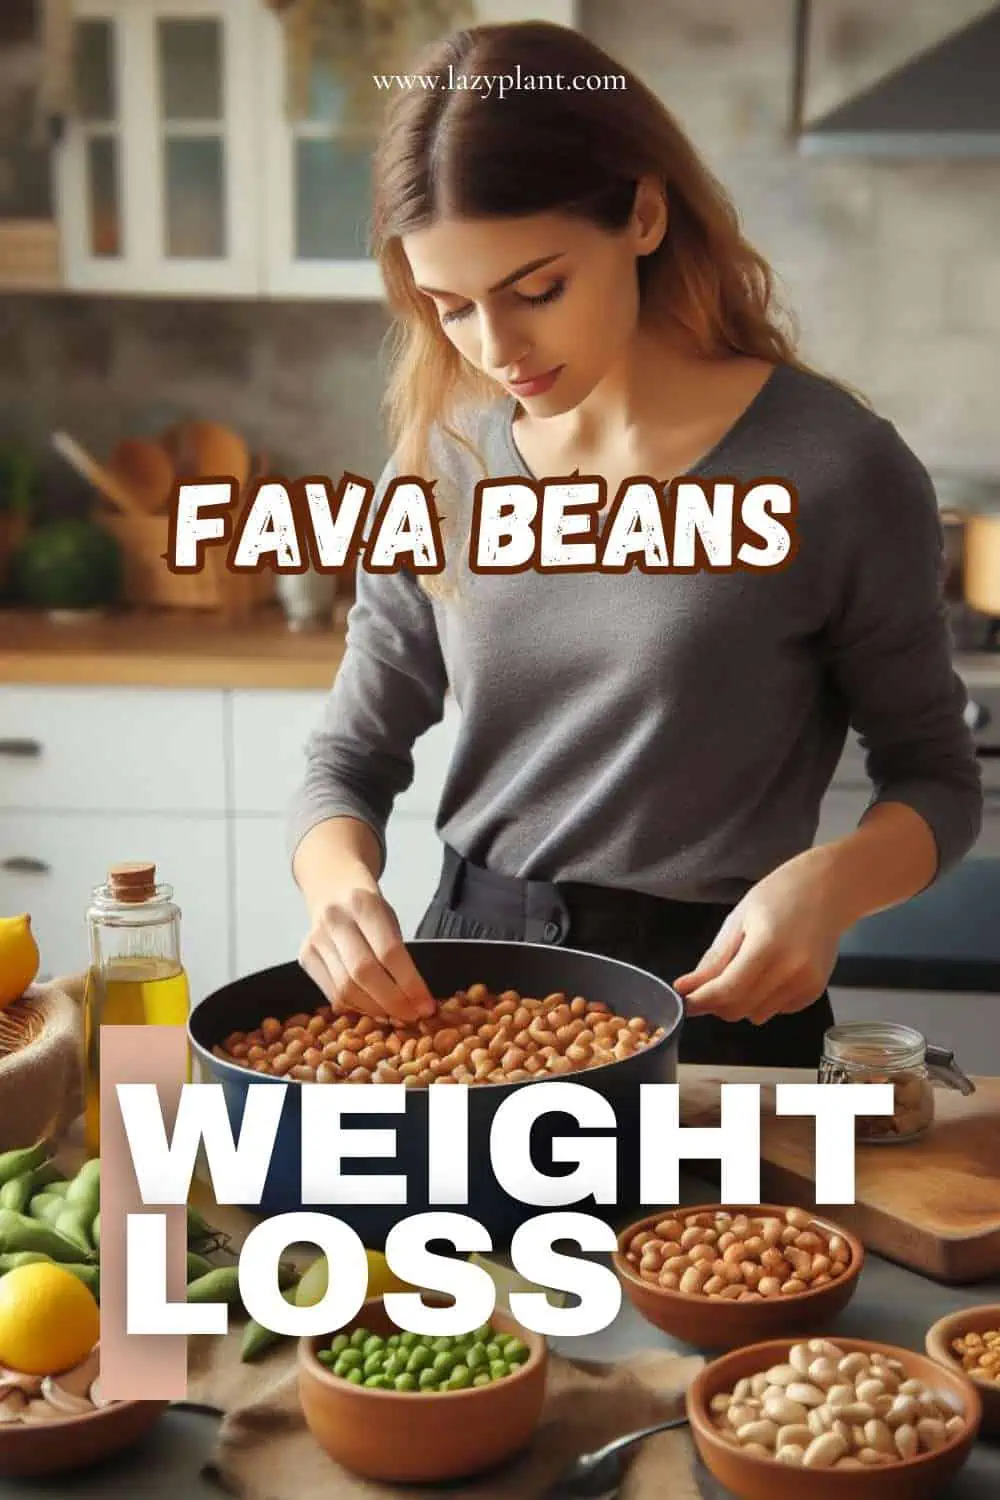 16 reasons to eat fava beans for Weight Loss.